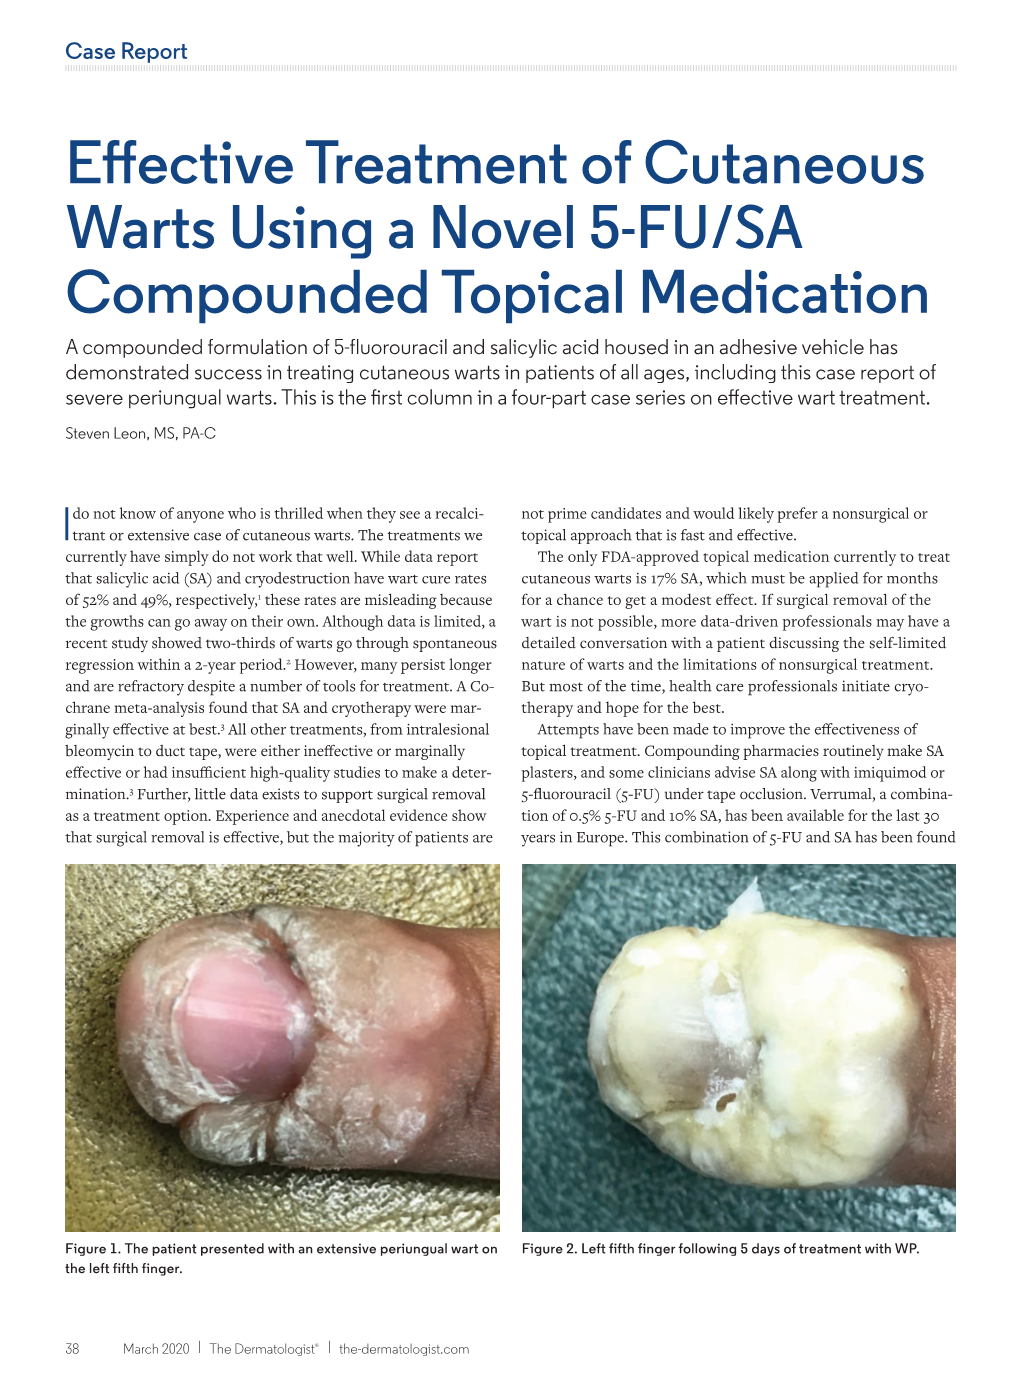 Effective Treatment of Cutaneous Warts